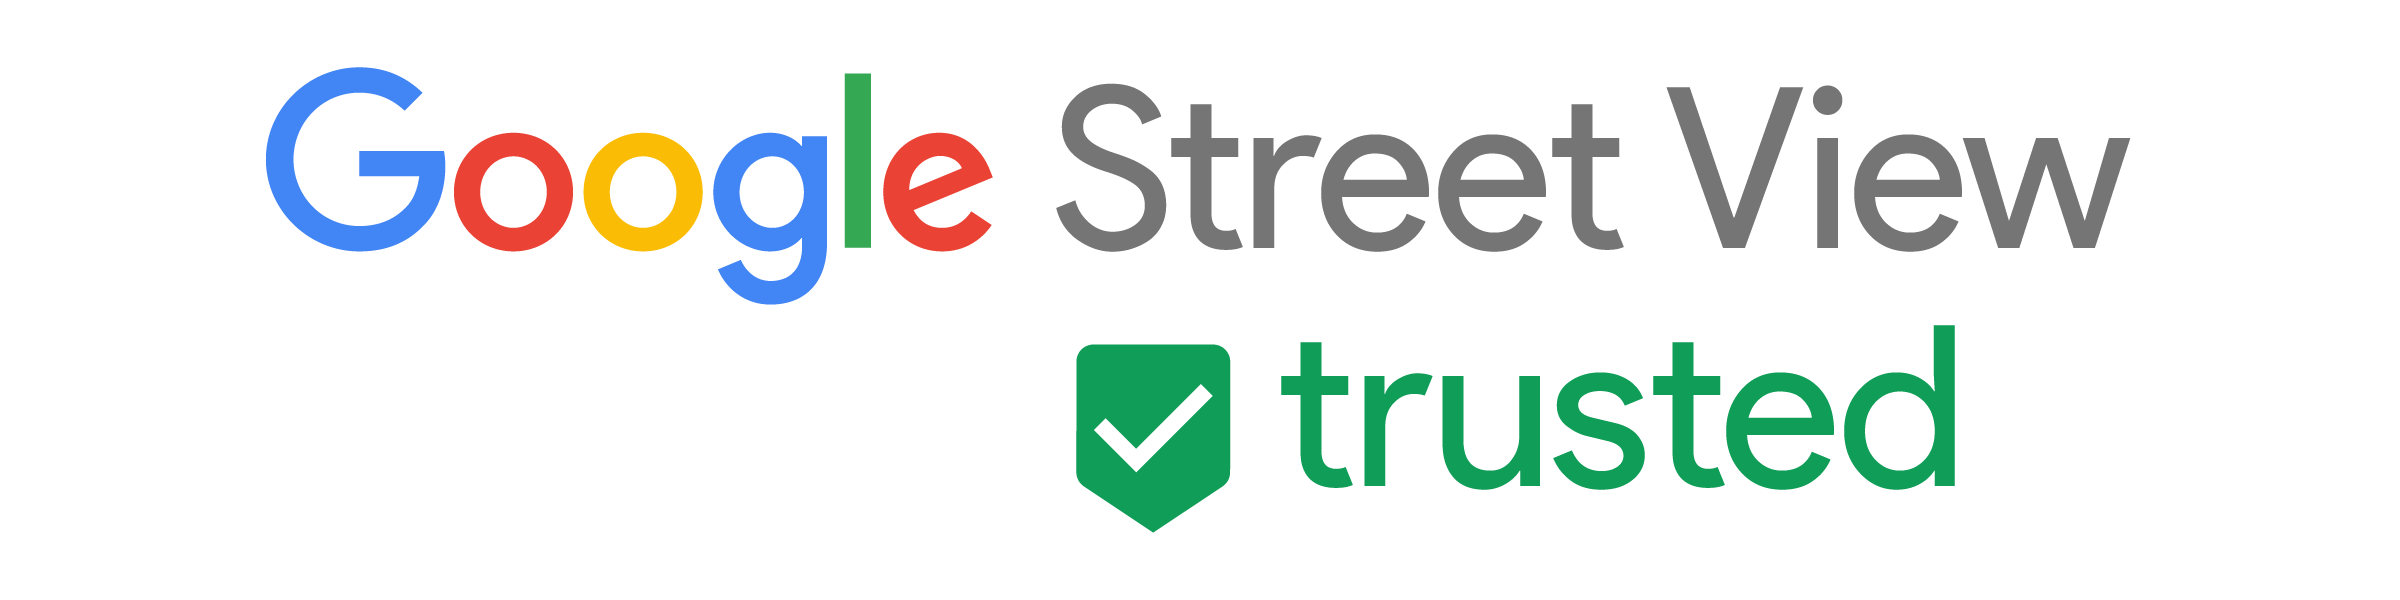 Street View trusted